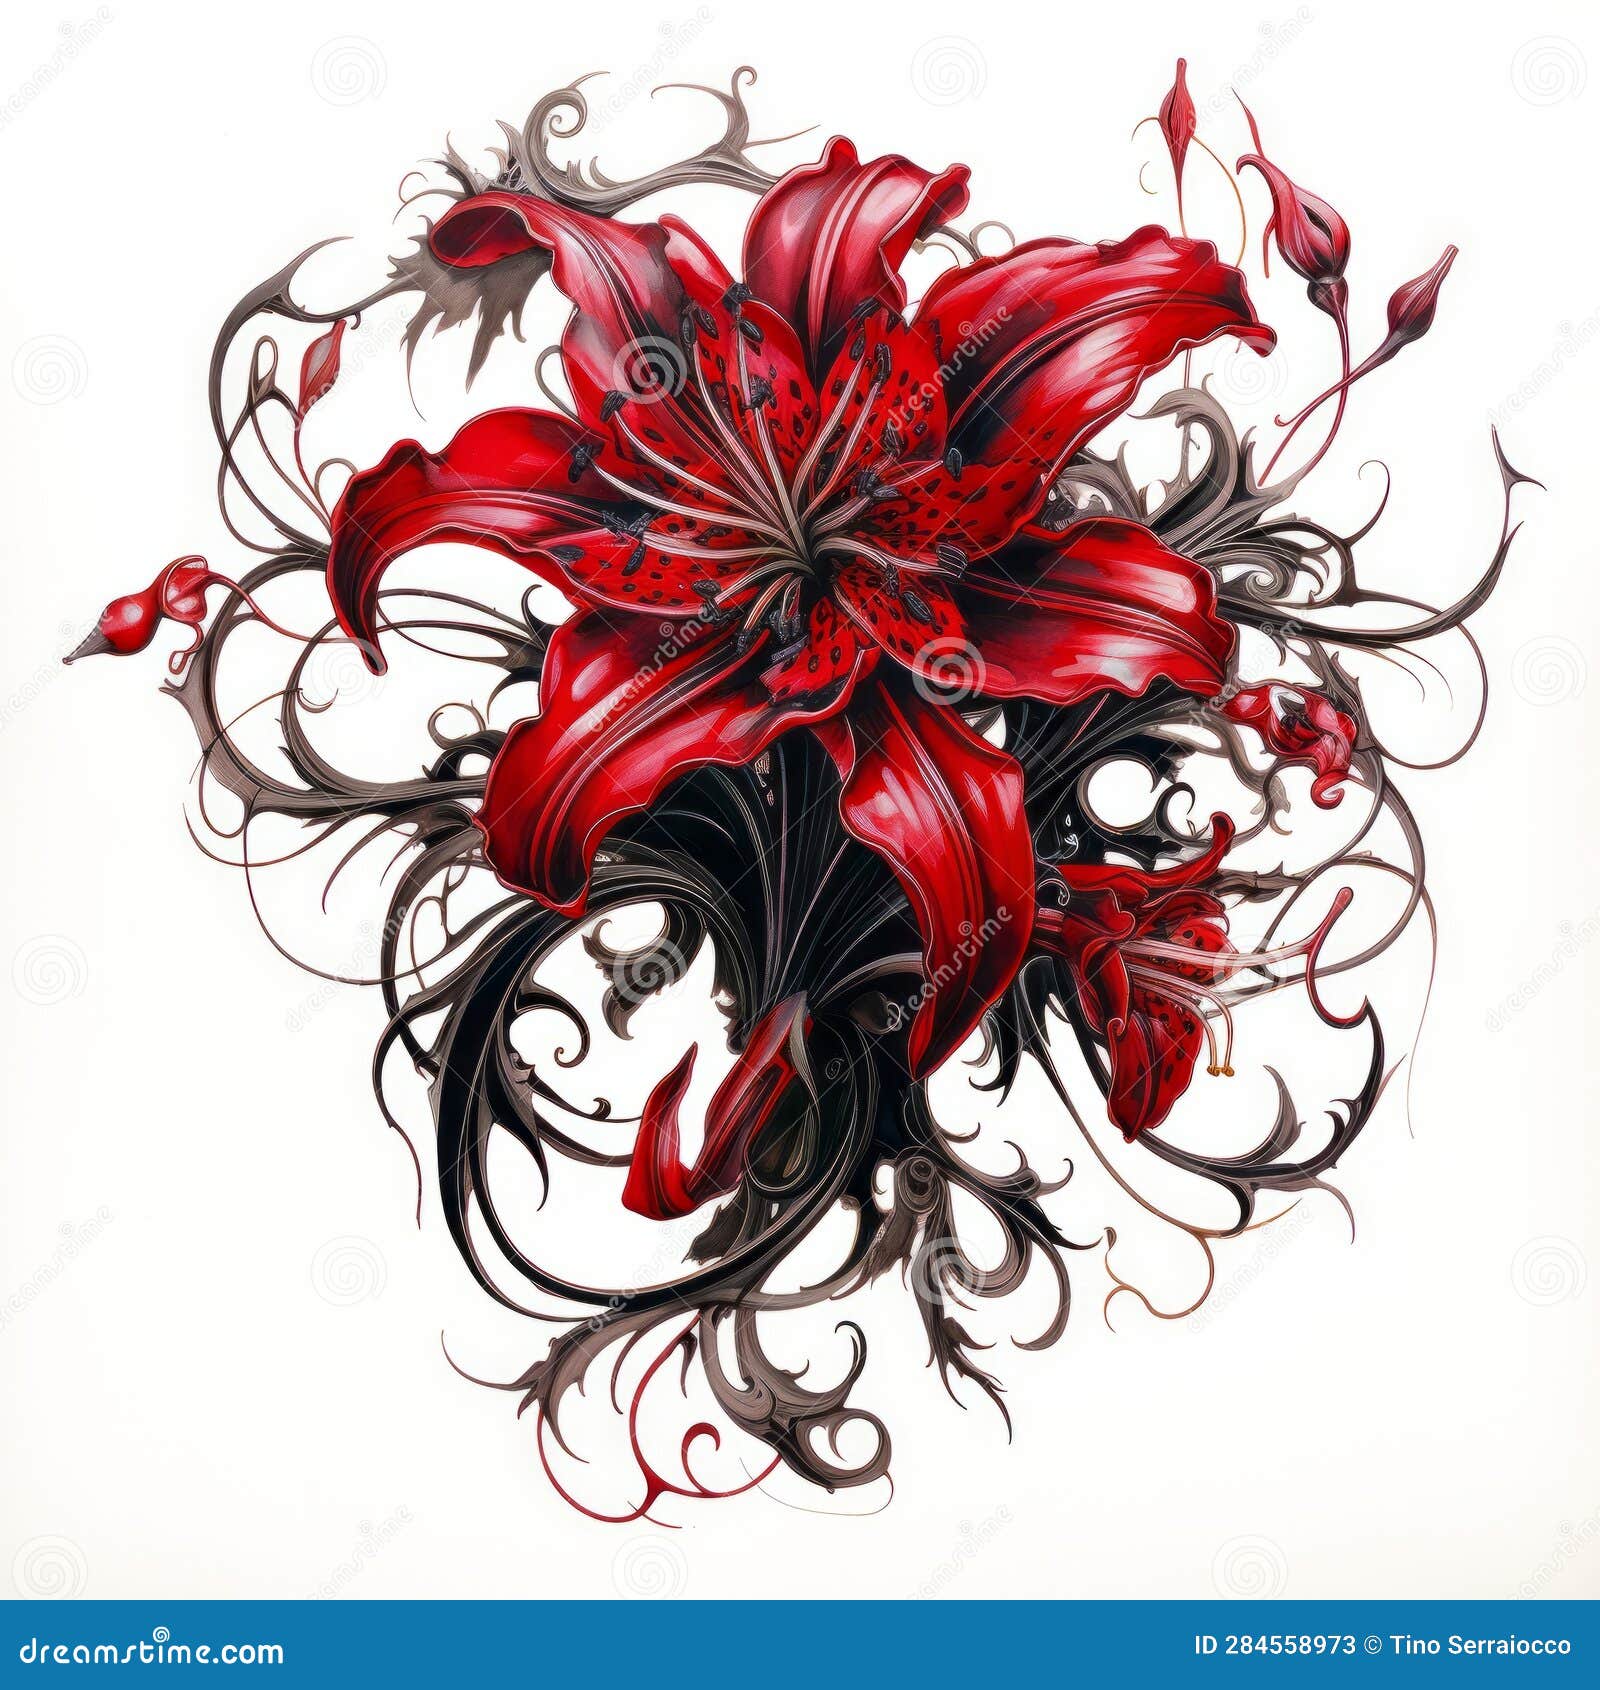 Red spider lily tattoo located on the upper arm